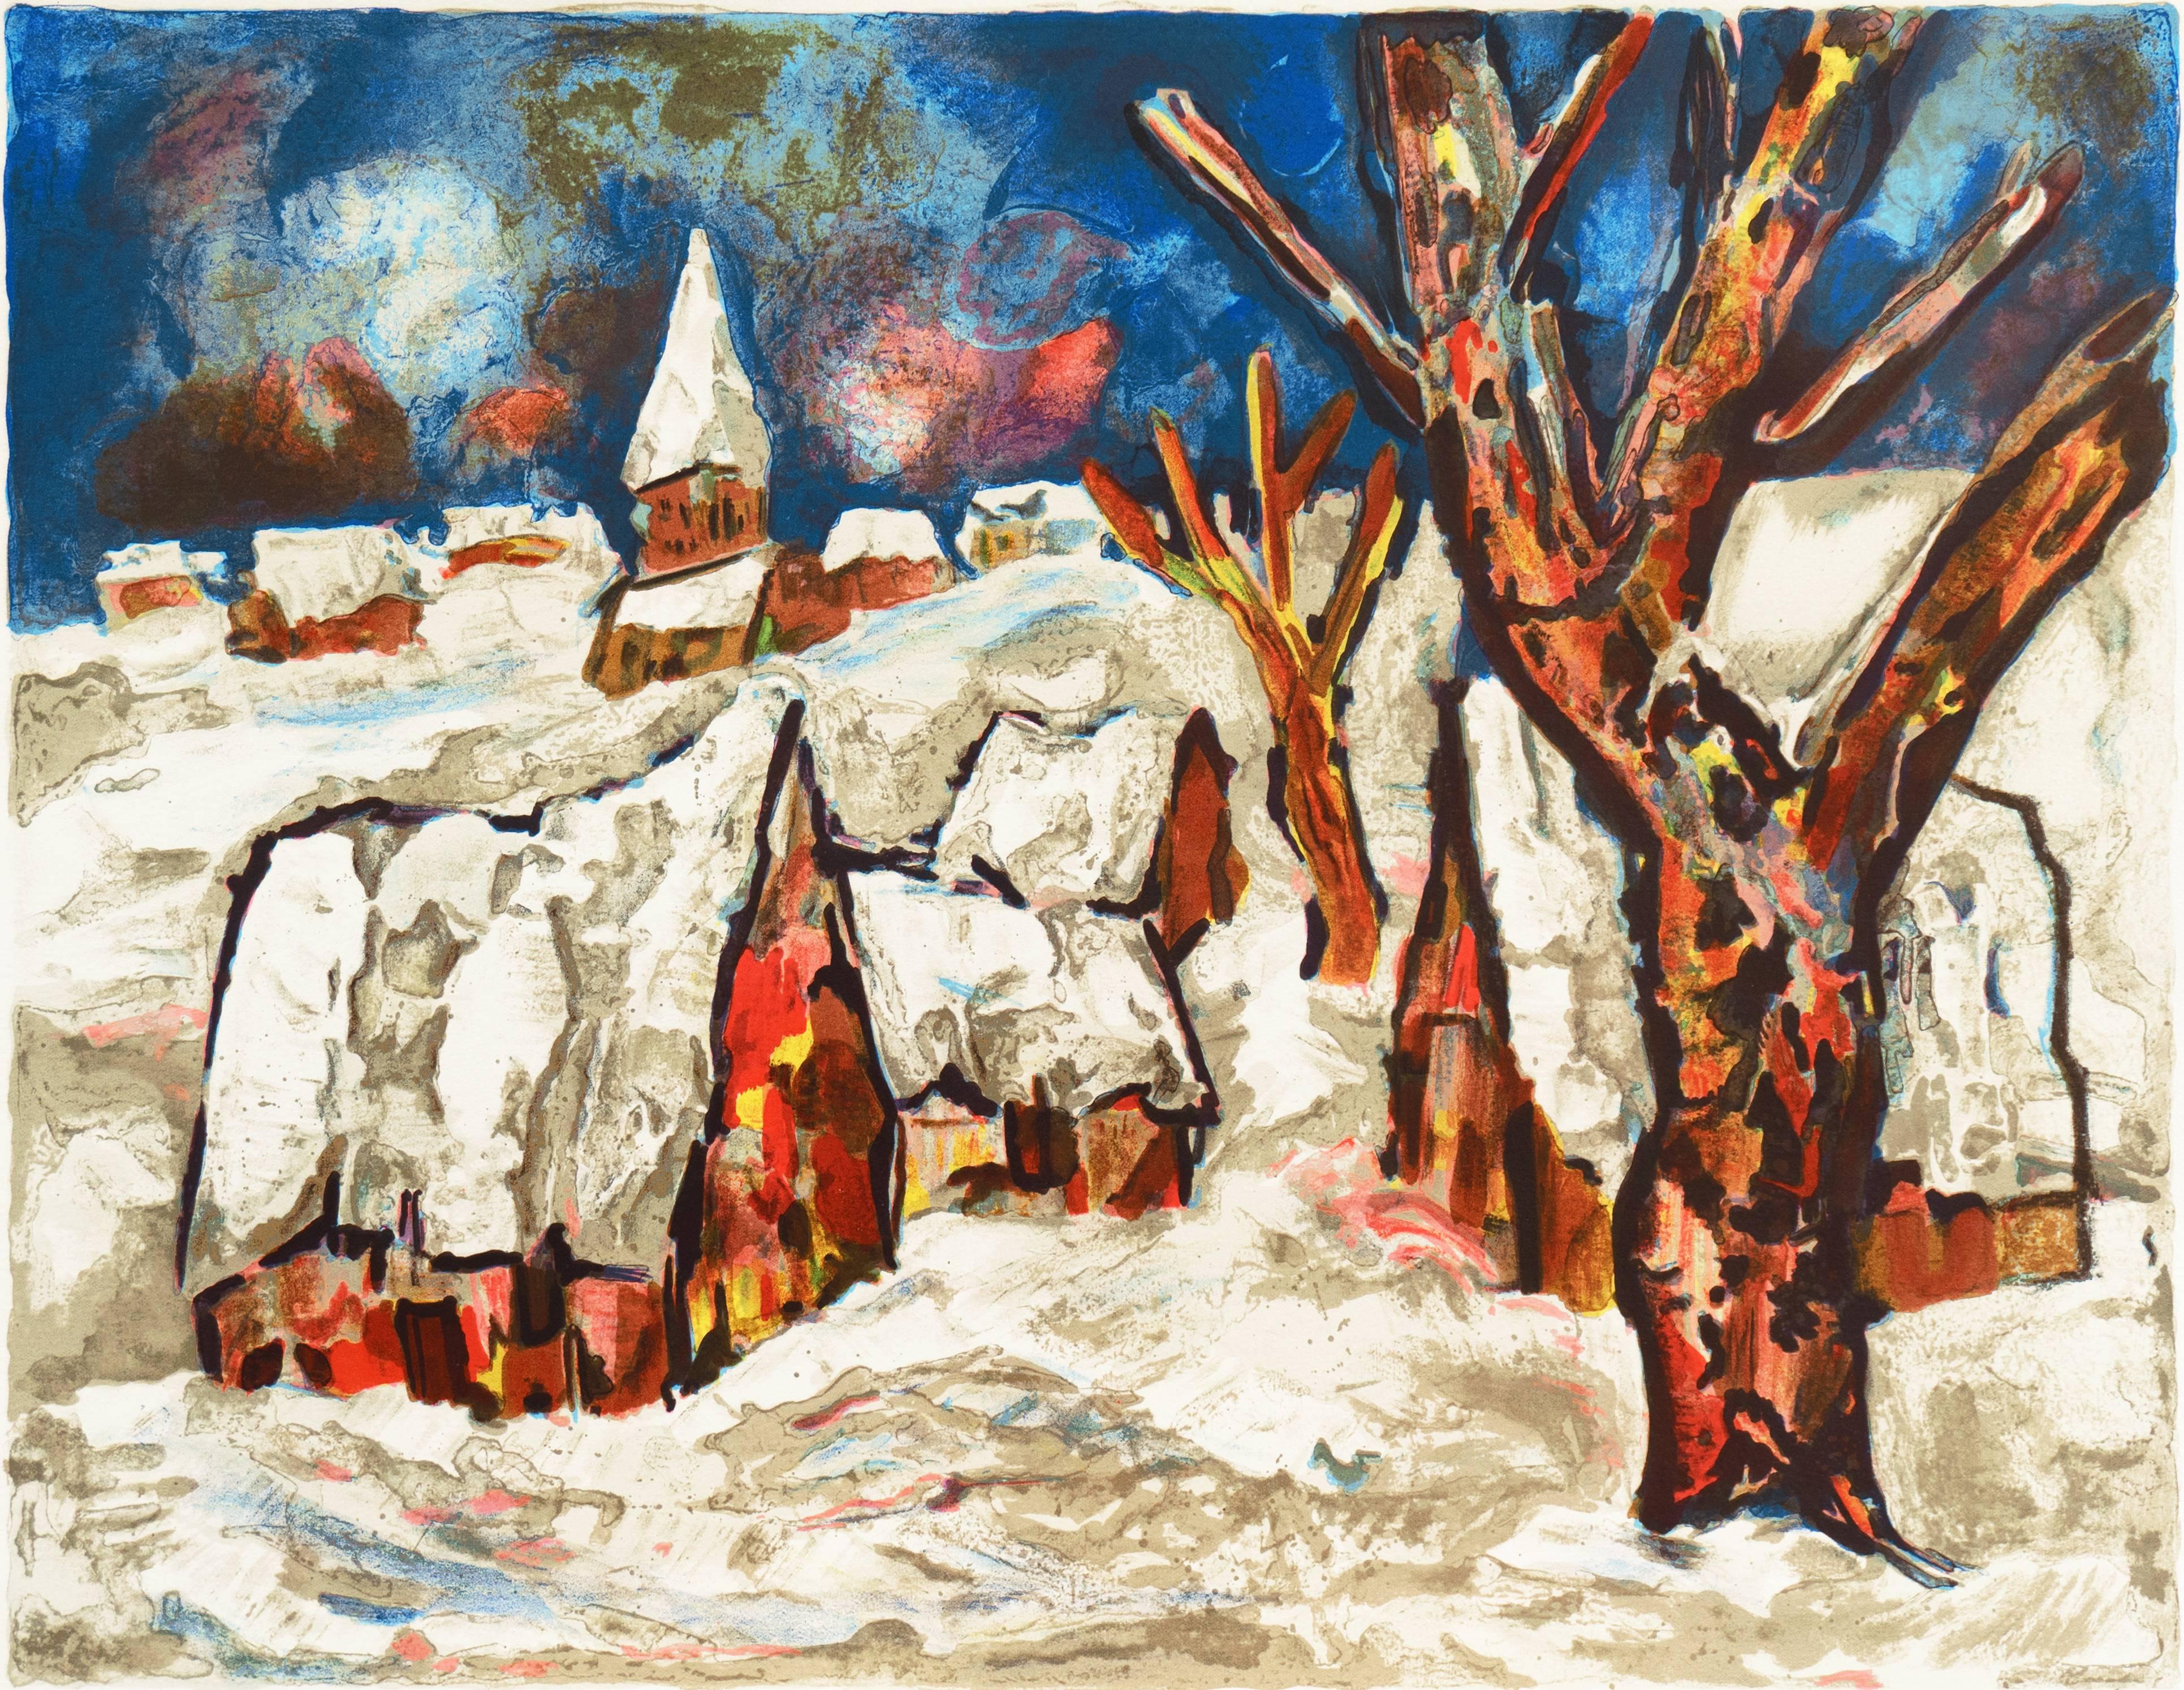 'Snow Covered Village', School of Paris French Post-Impressionist